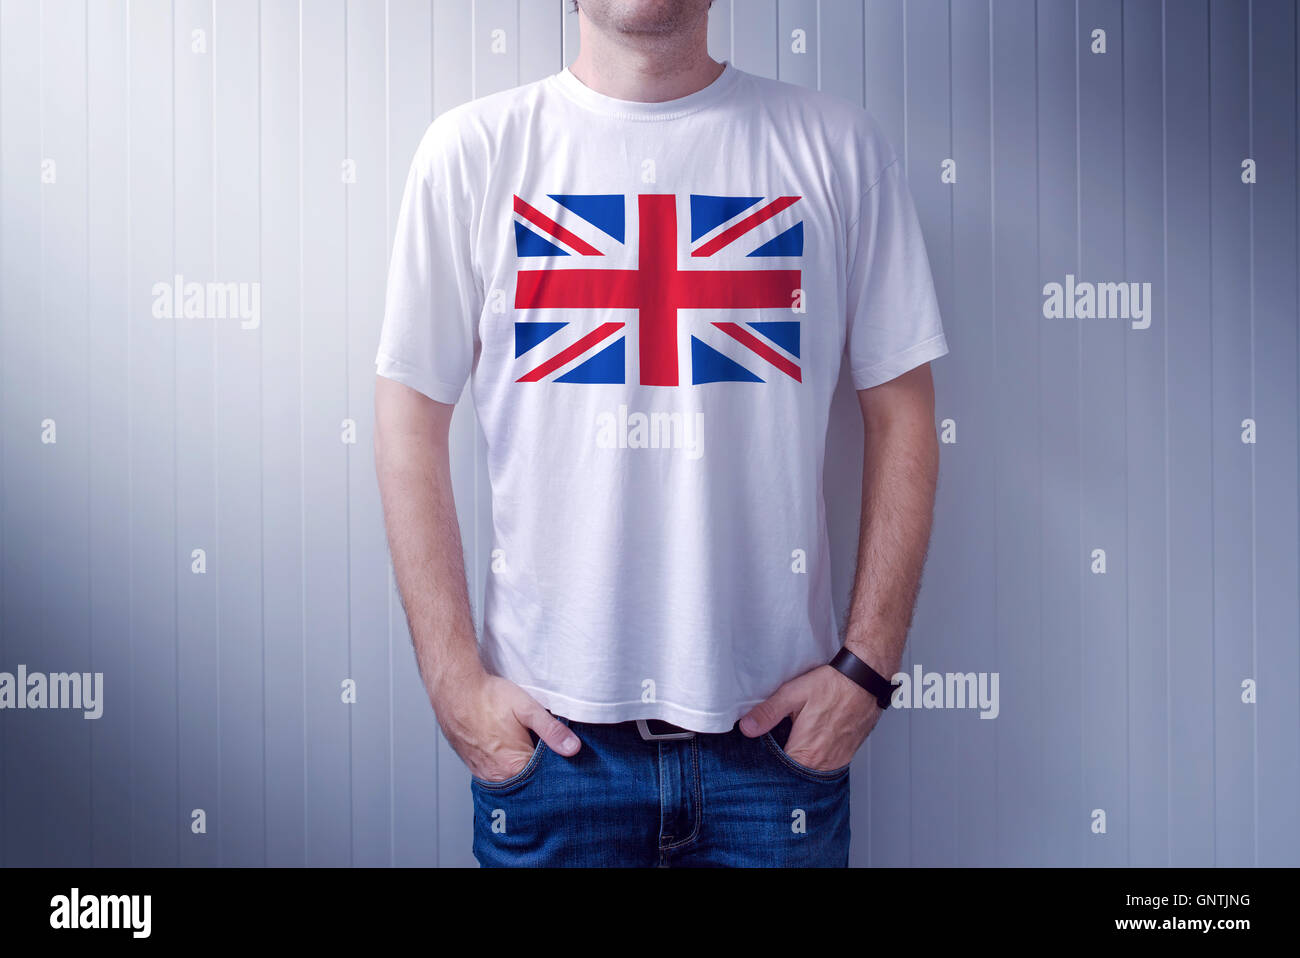 Man wearing white shirt with United Kingdom flag print, adult male person supporting Great Britain Stock Photo